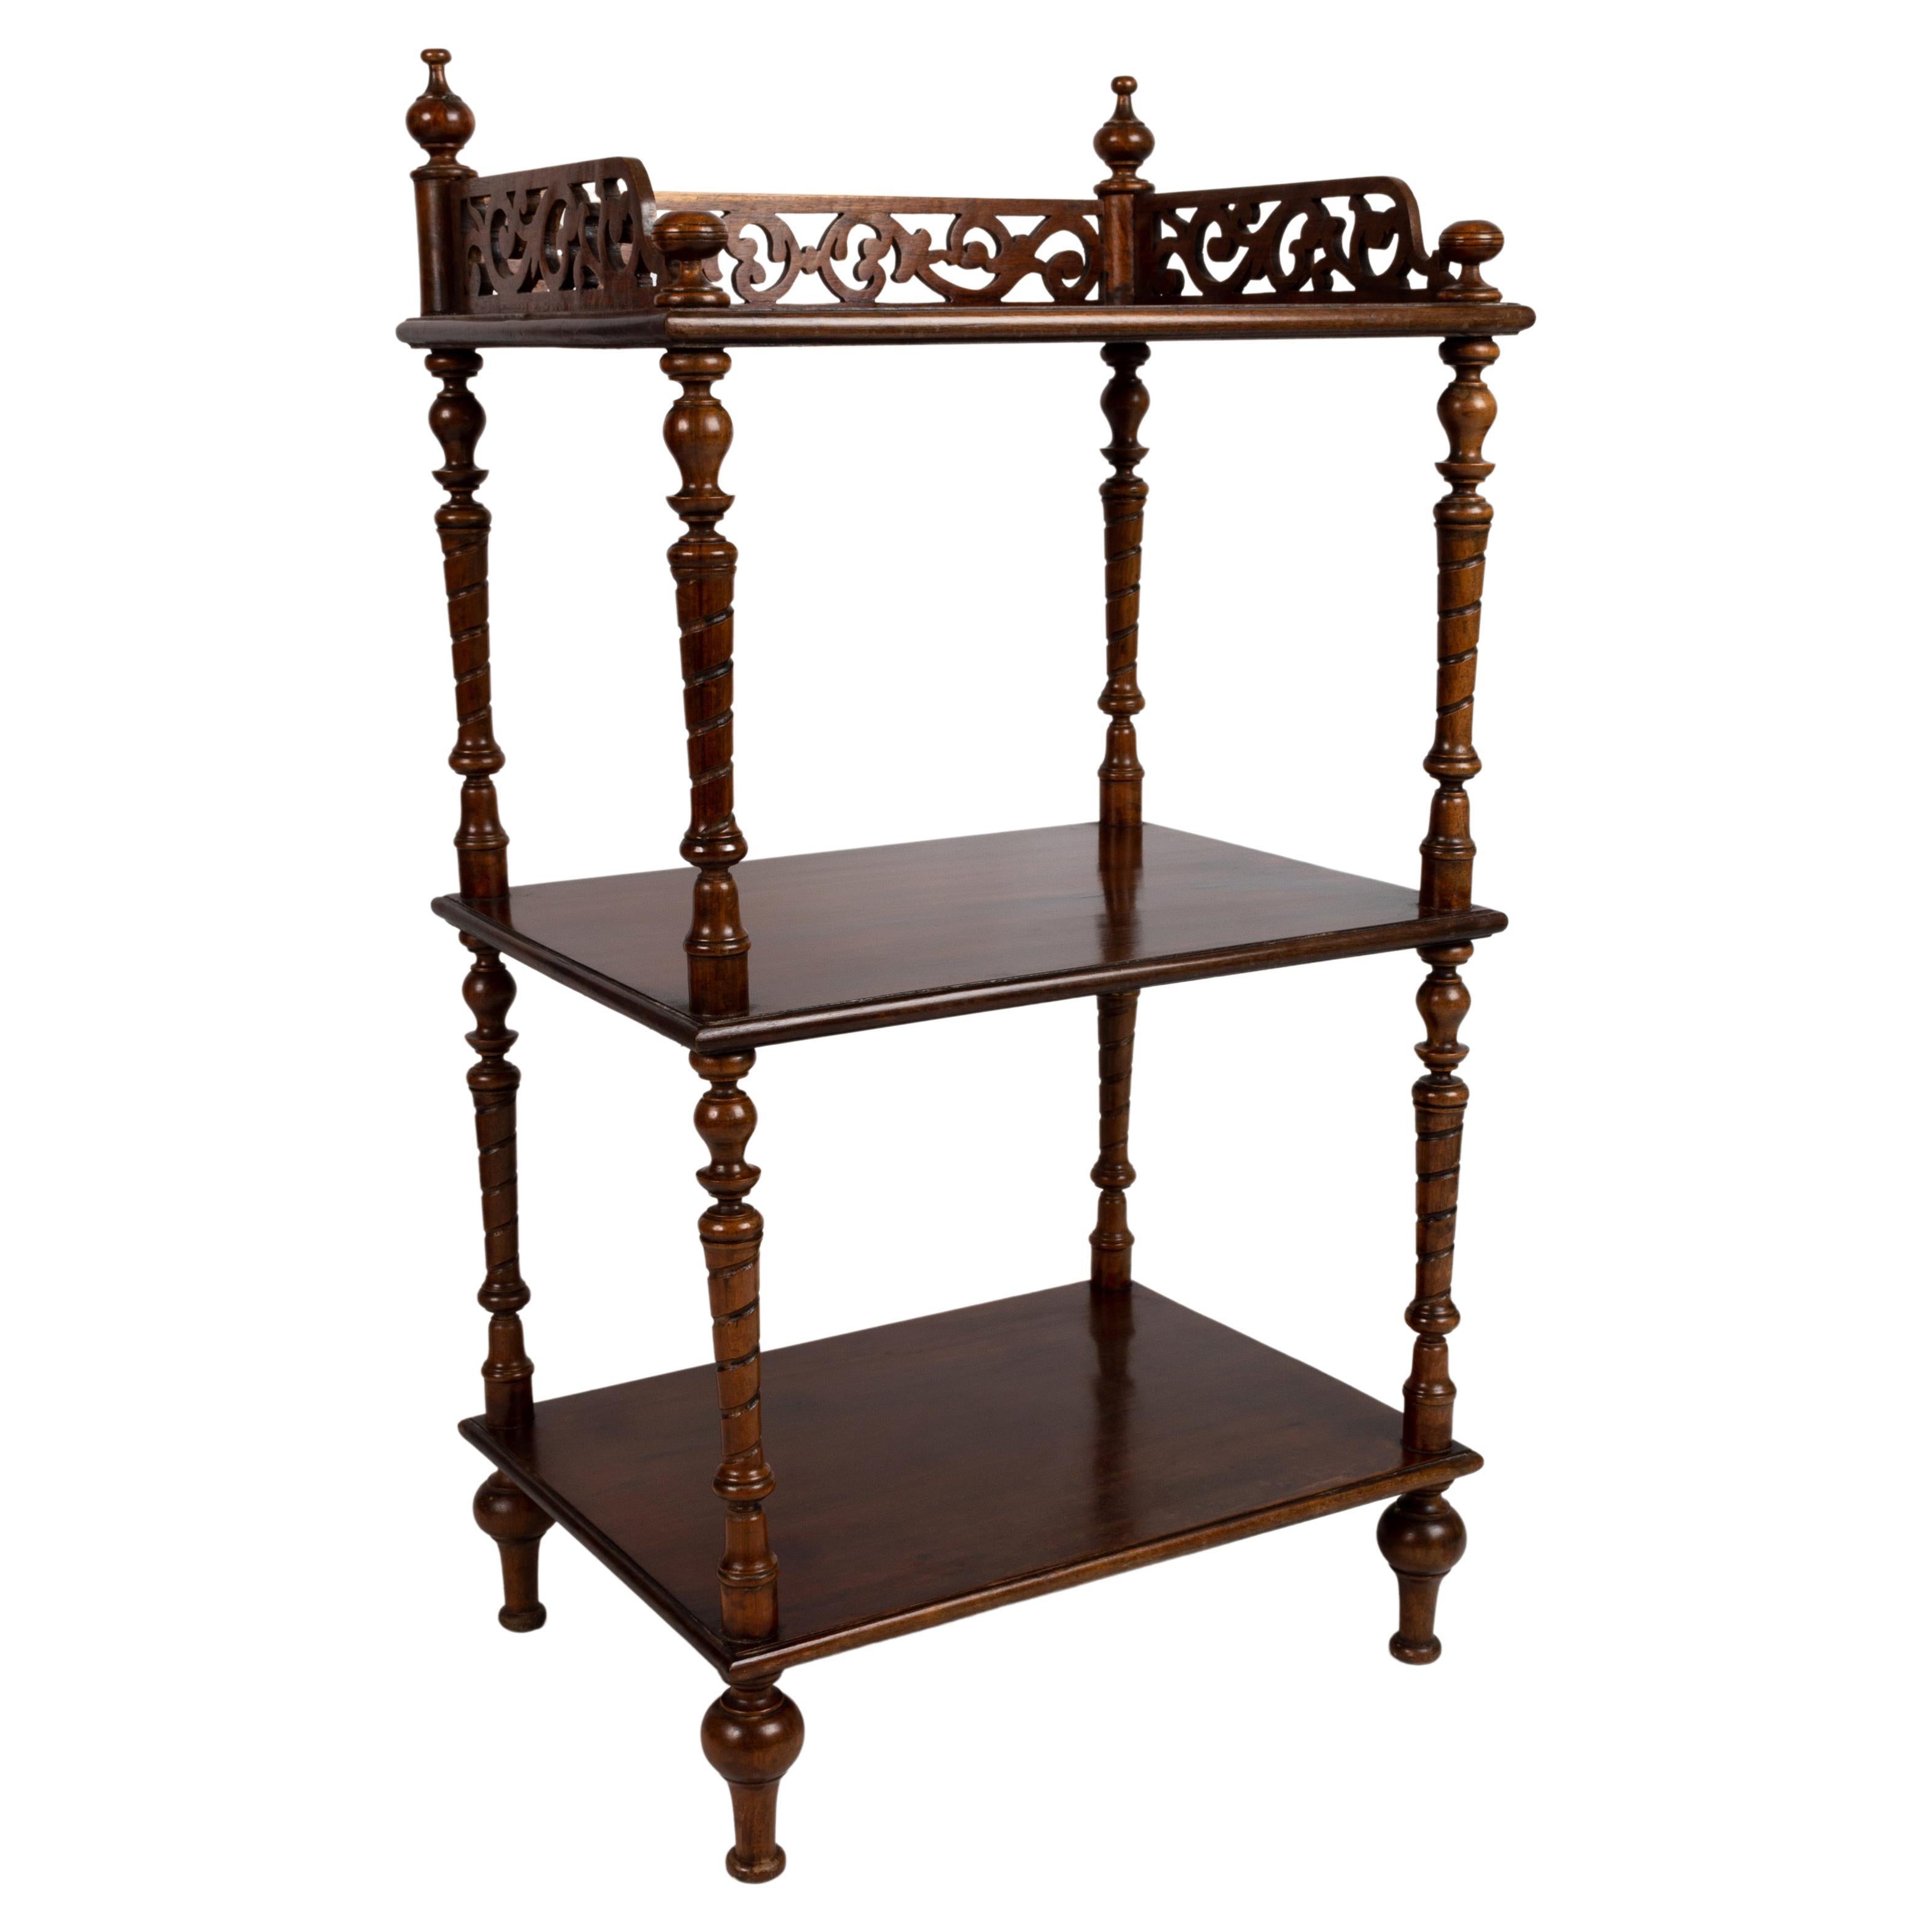 Antique English Victorian Carved Mahogany Whatnot Etagere Shelves C.1880